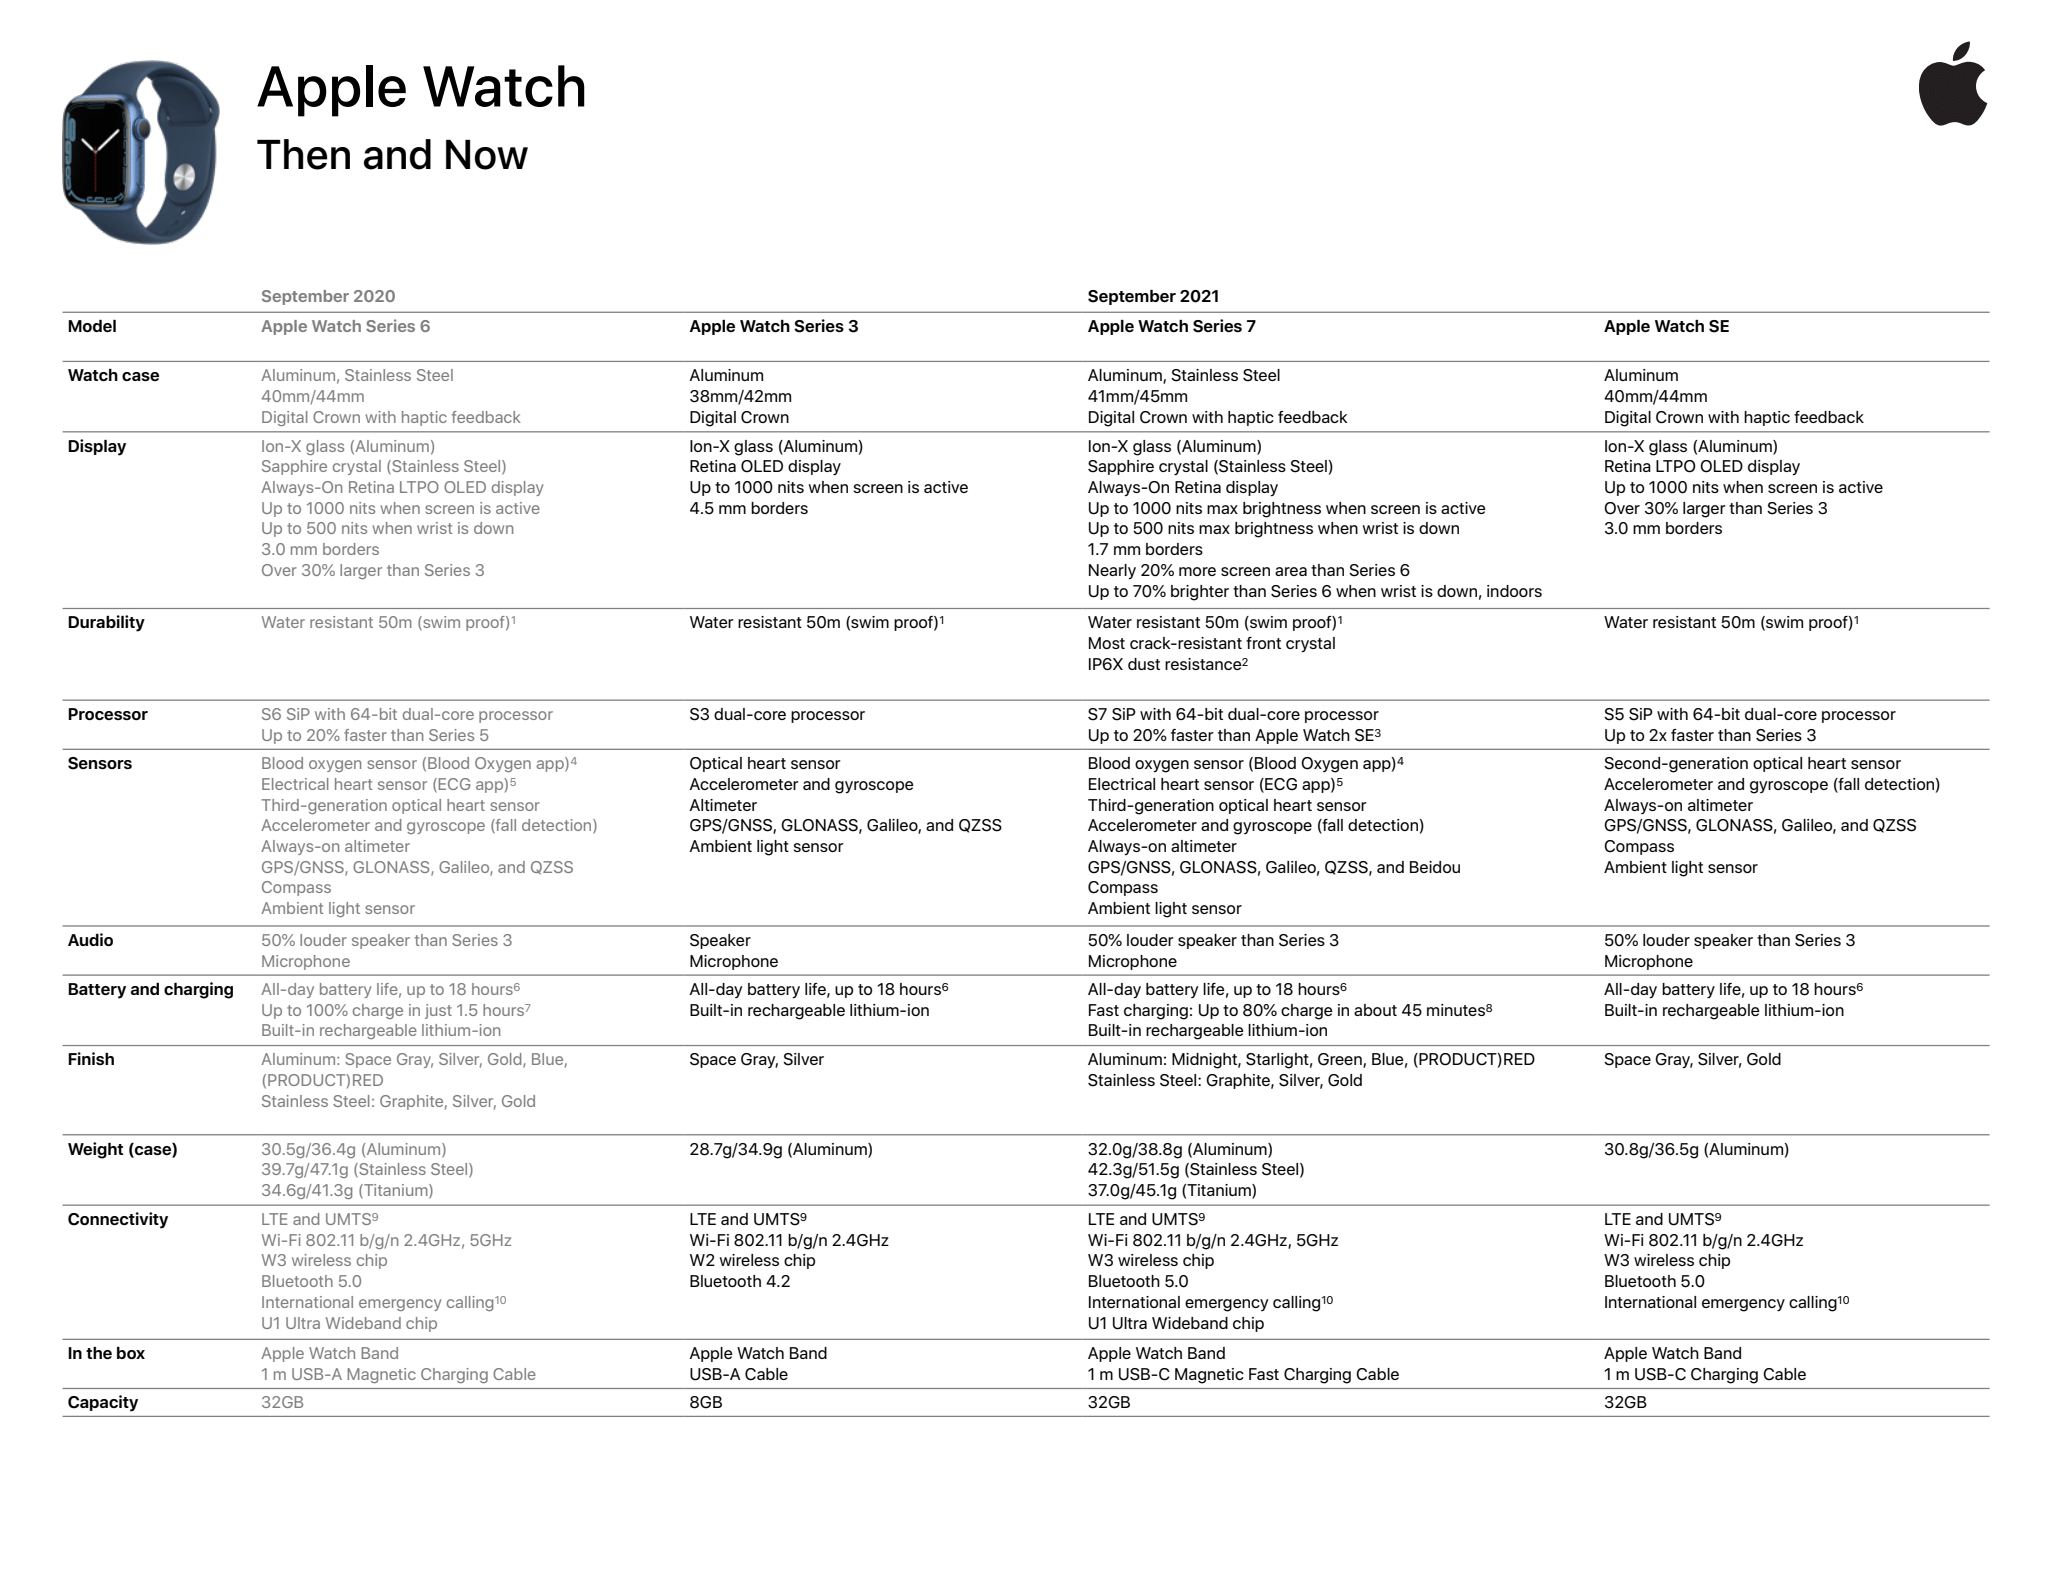 What they didn't tell you at the unveiling: detailed specs on the Apple Watch Series 7